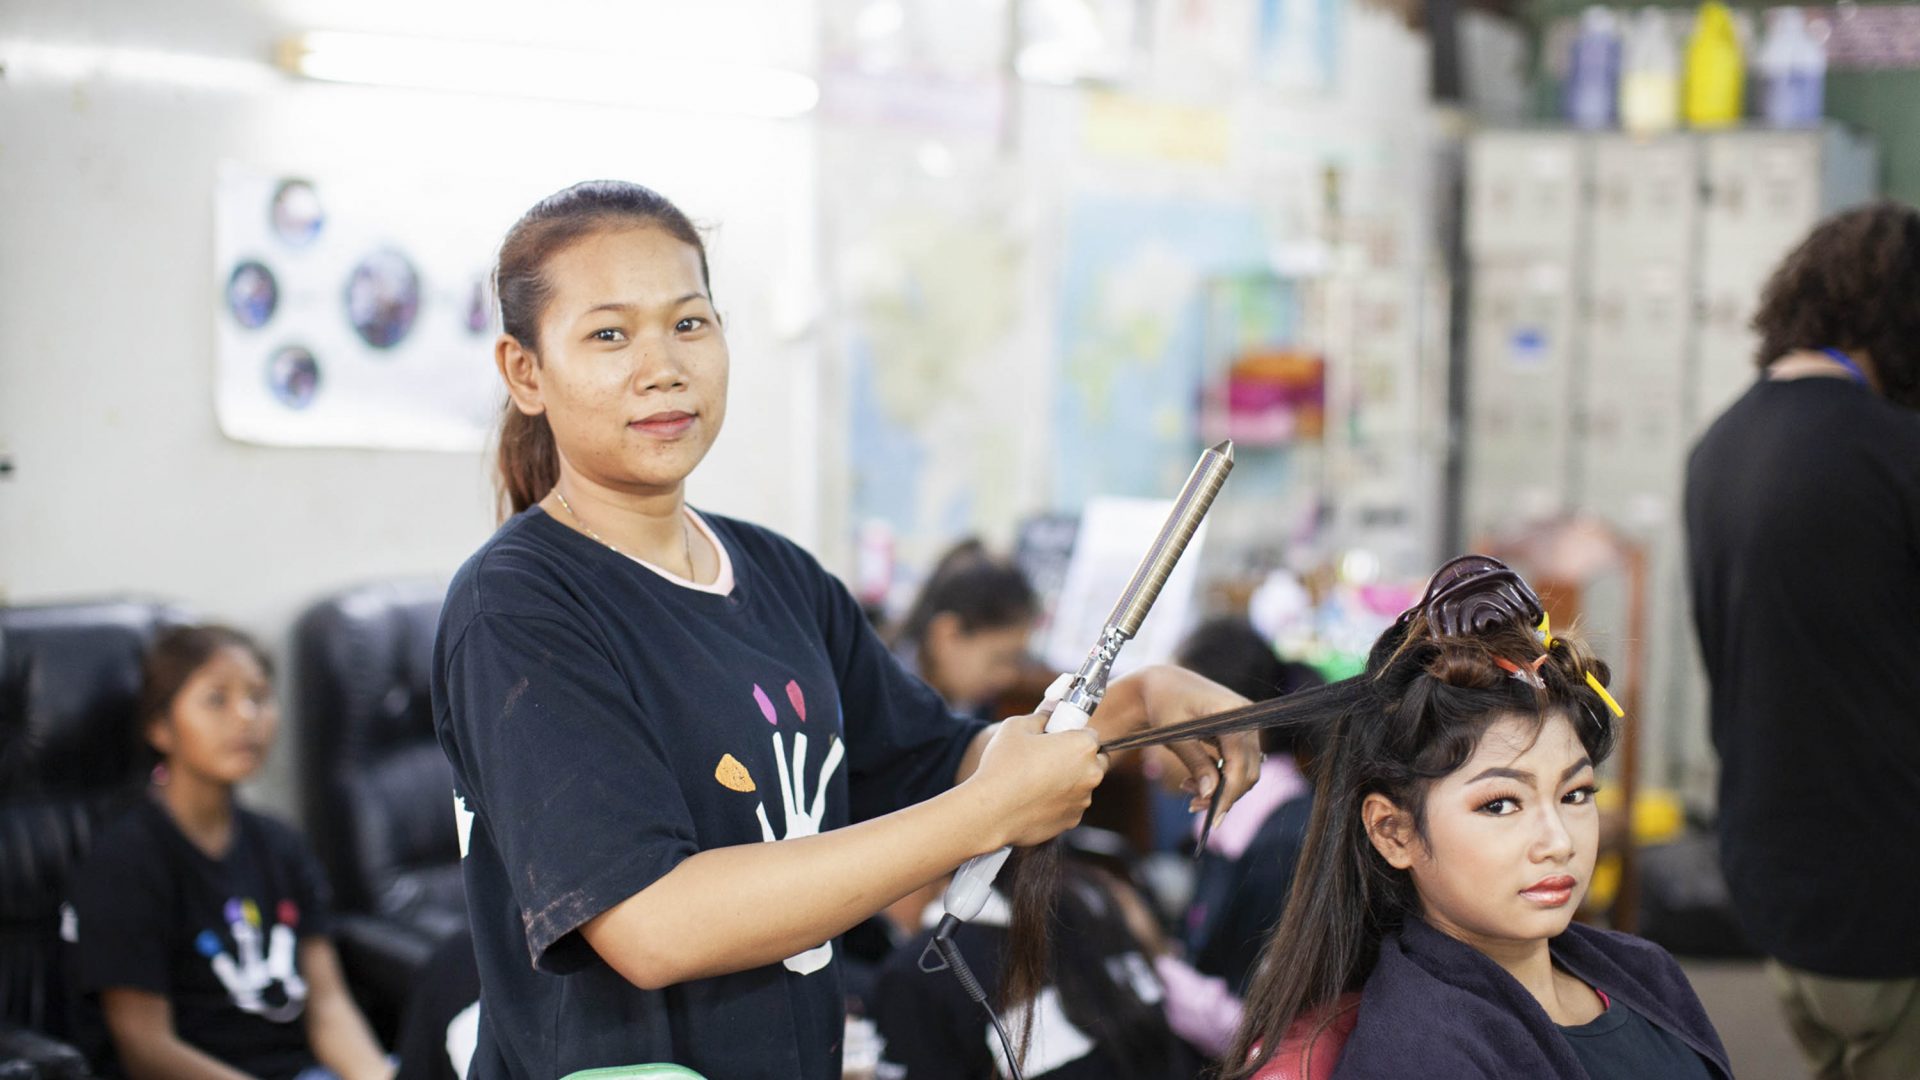 Friends-International is helping to improve the lives of street-living and working children through vocational training, including in beauty.